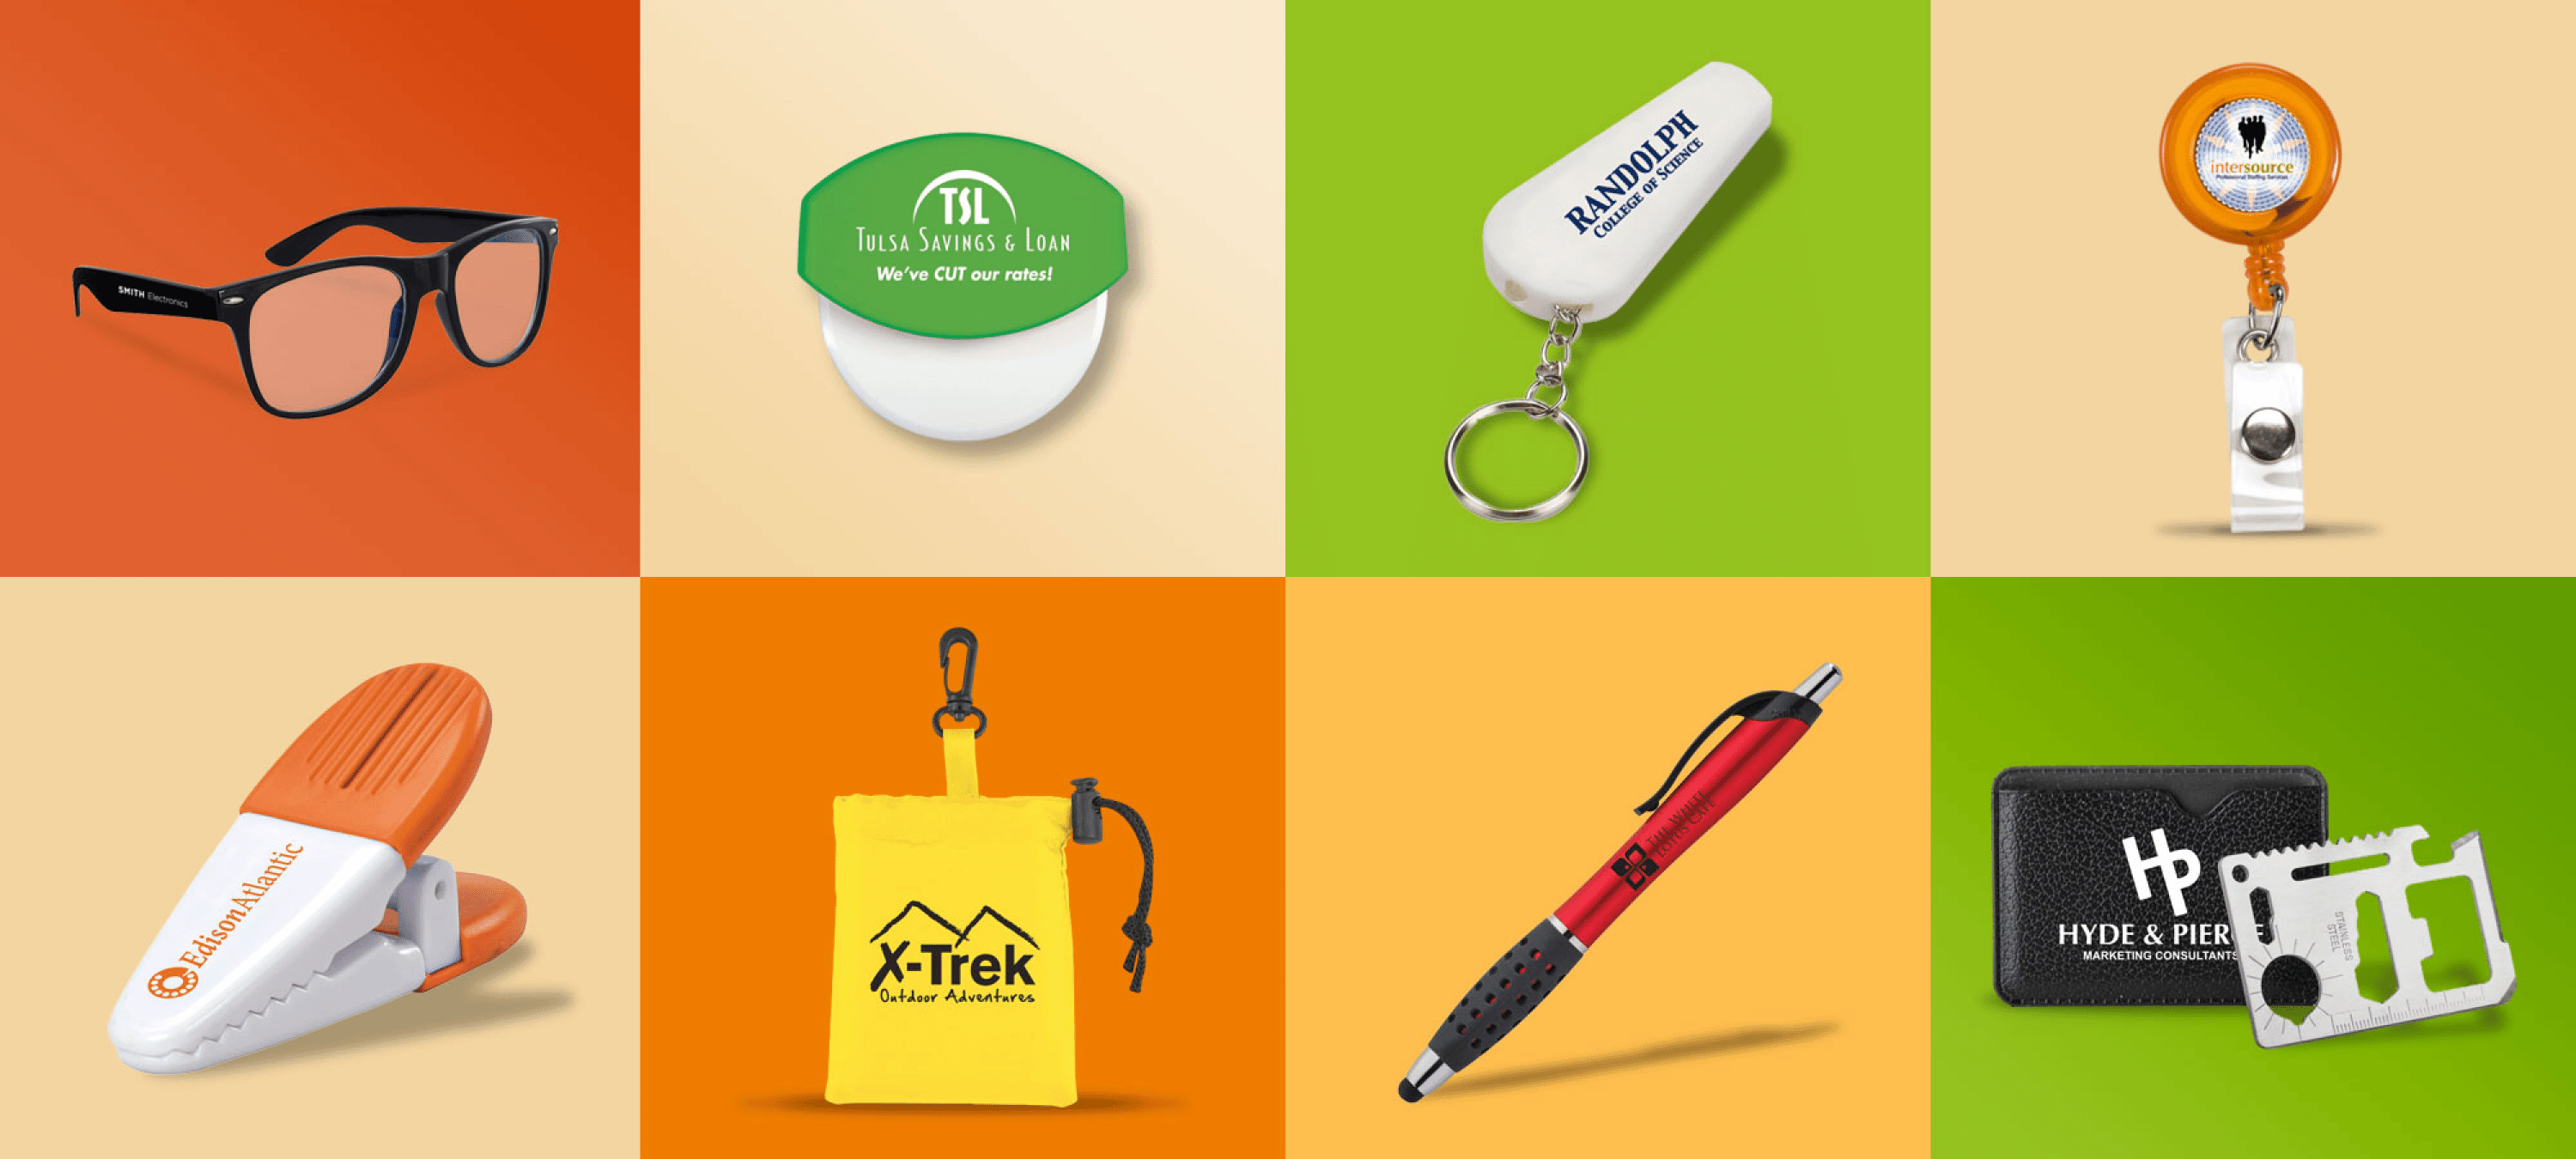 How to Choose Promotional Tchotchkes that People Actually Want